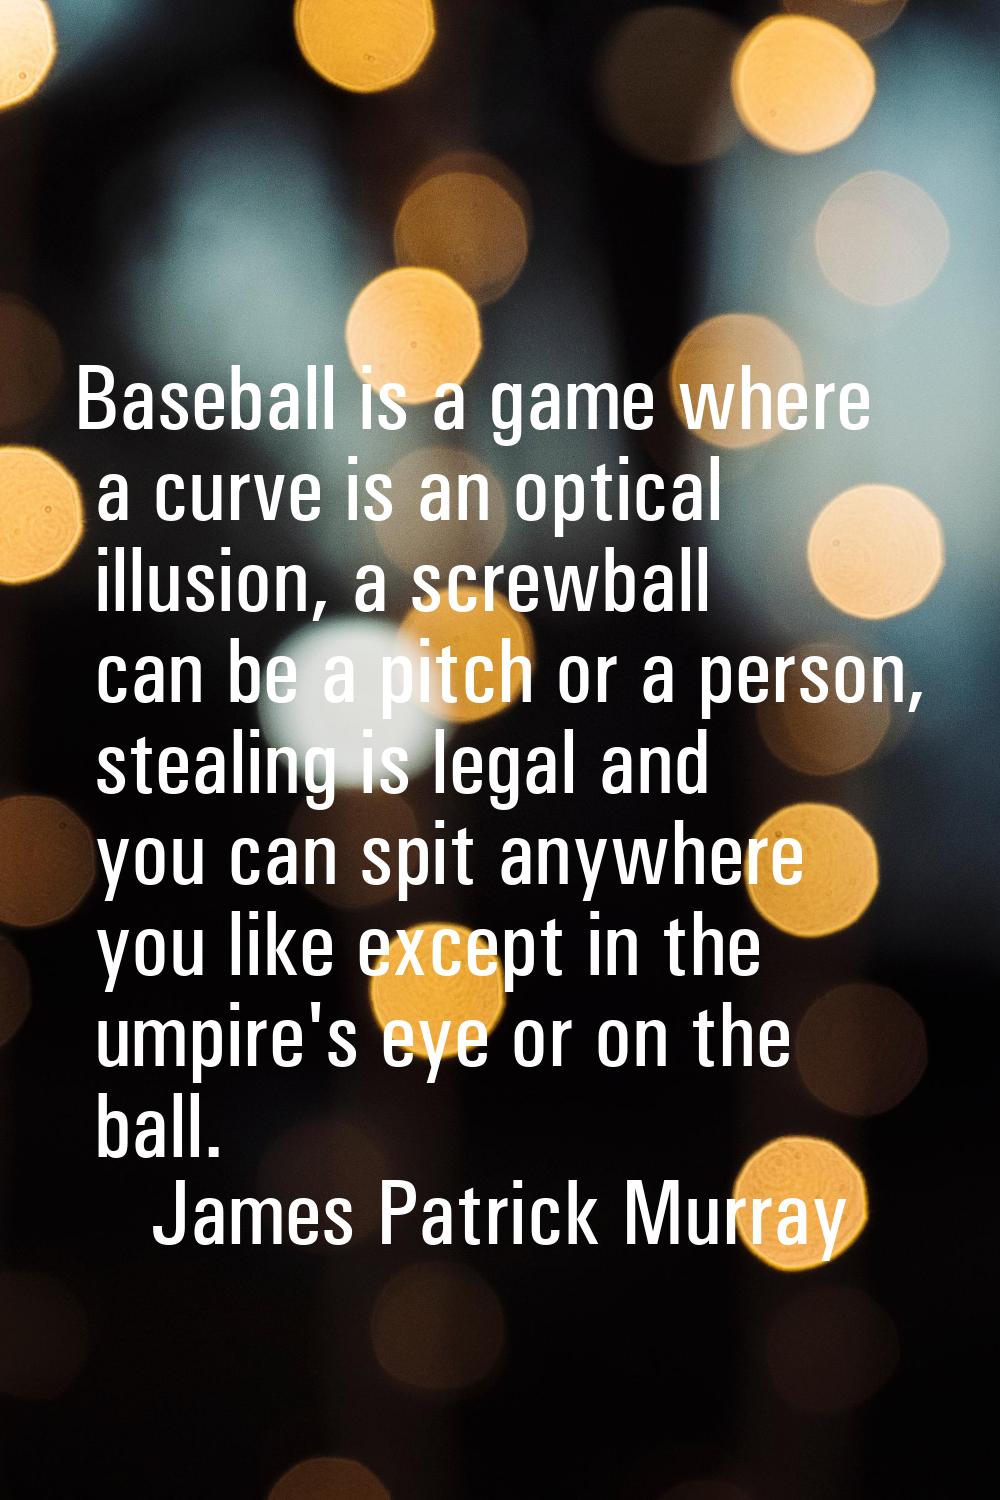 Baseball is a game where a curve is an optical illusion, a screwball can be a pitch or a person, st